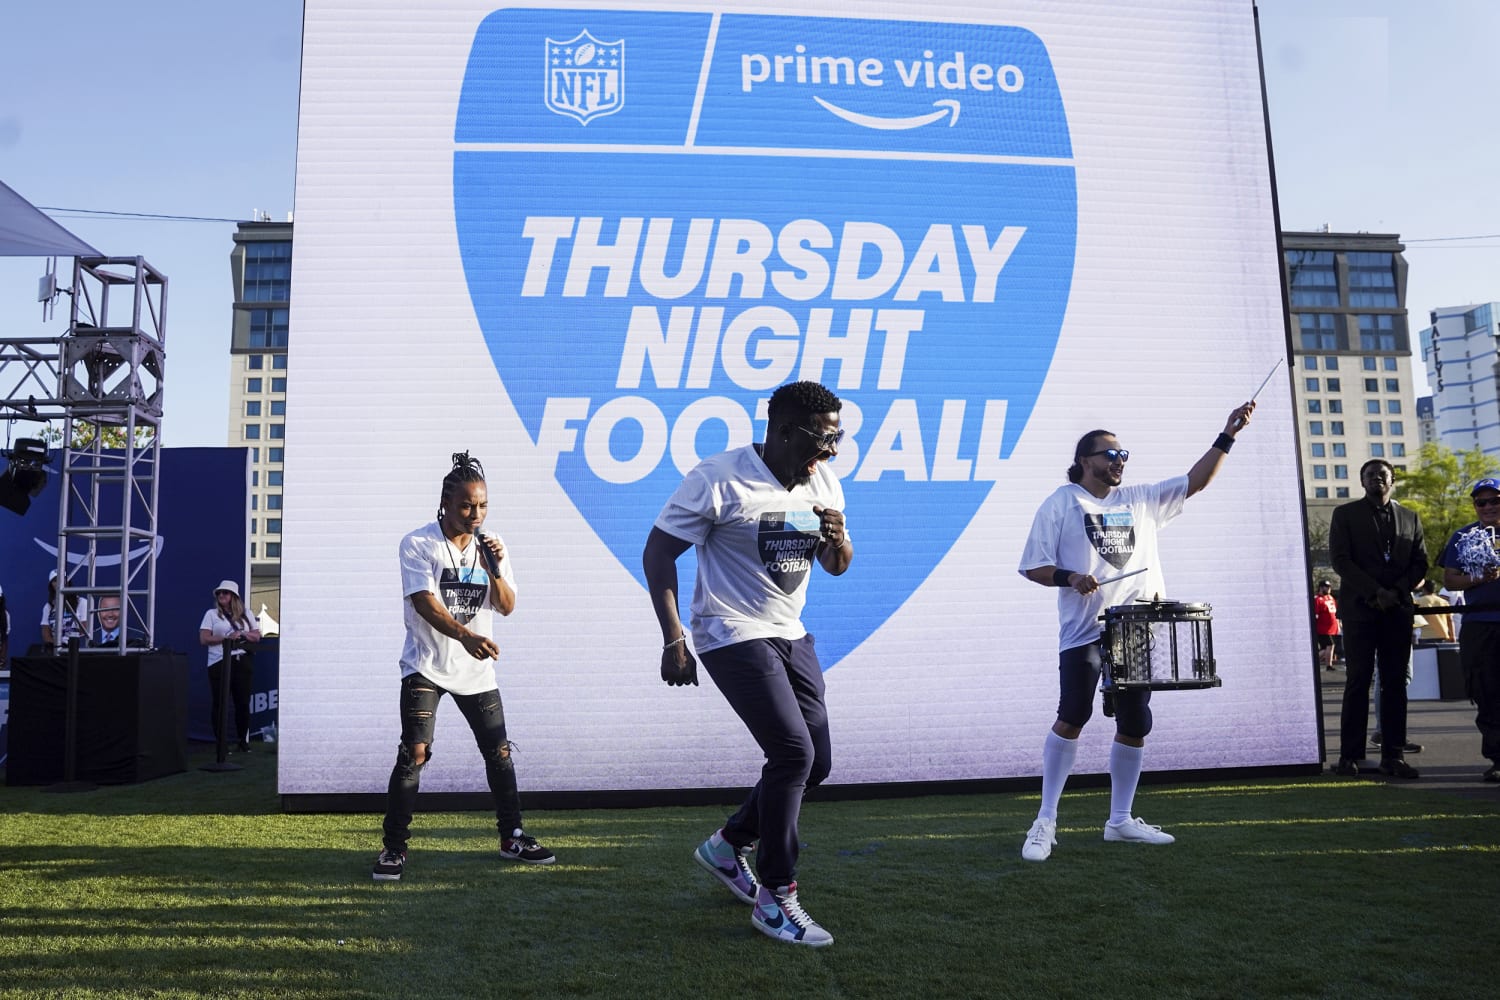 NFL on  Prime Video is the latest foray by leagues into streaming